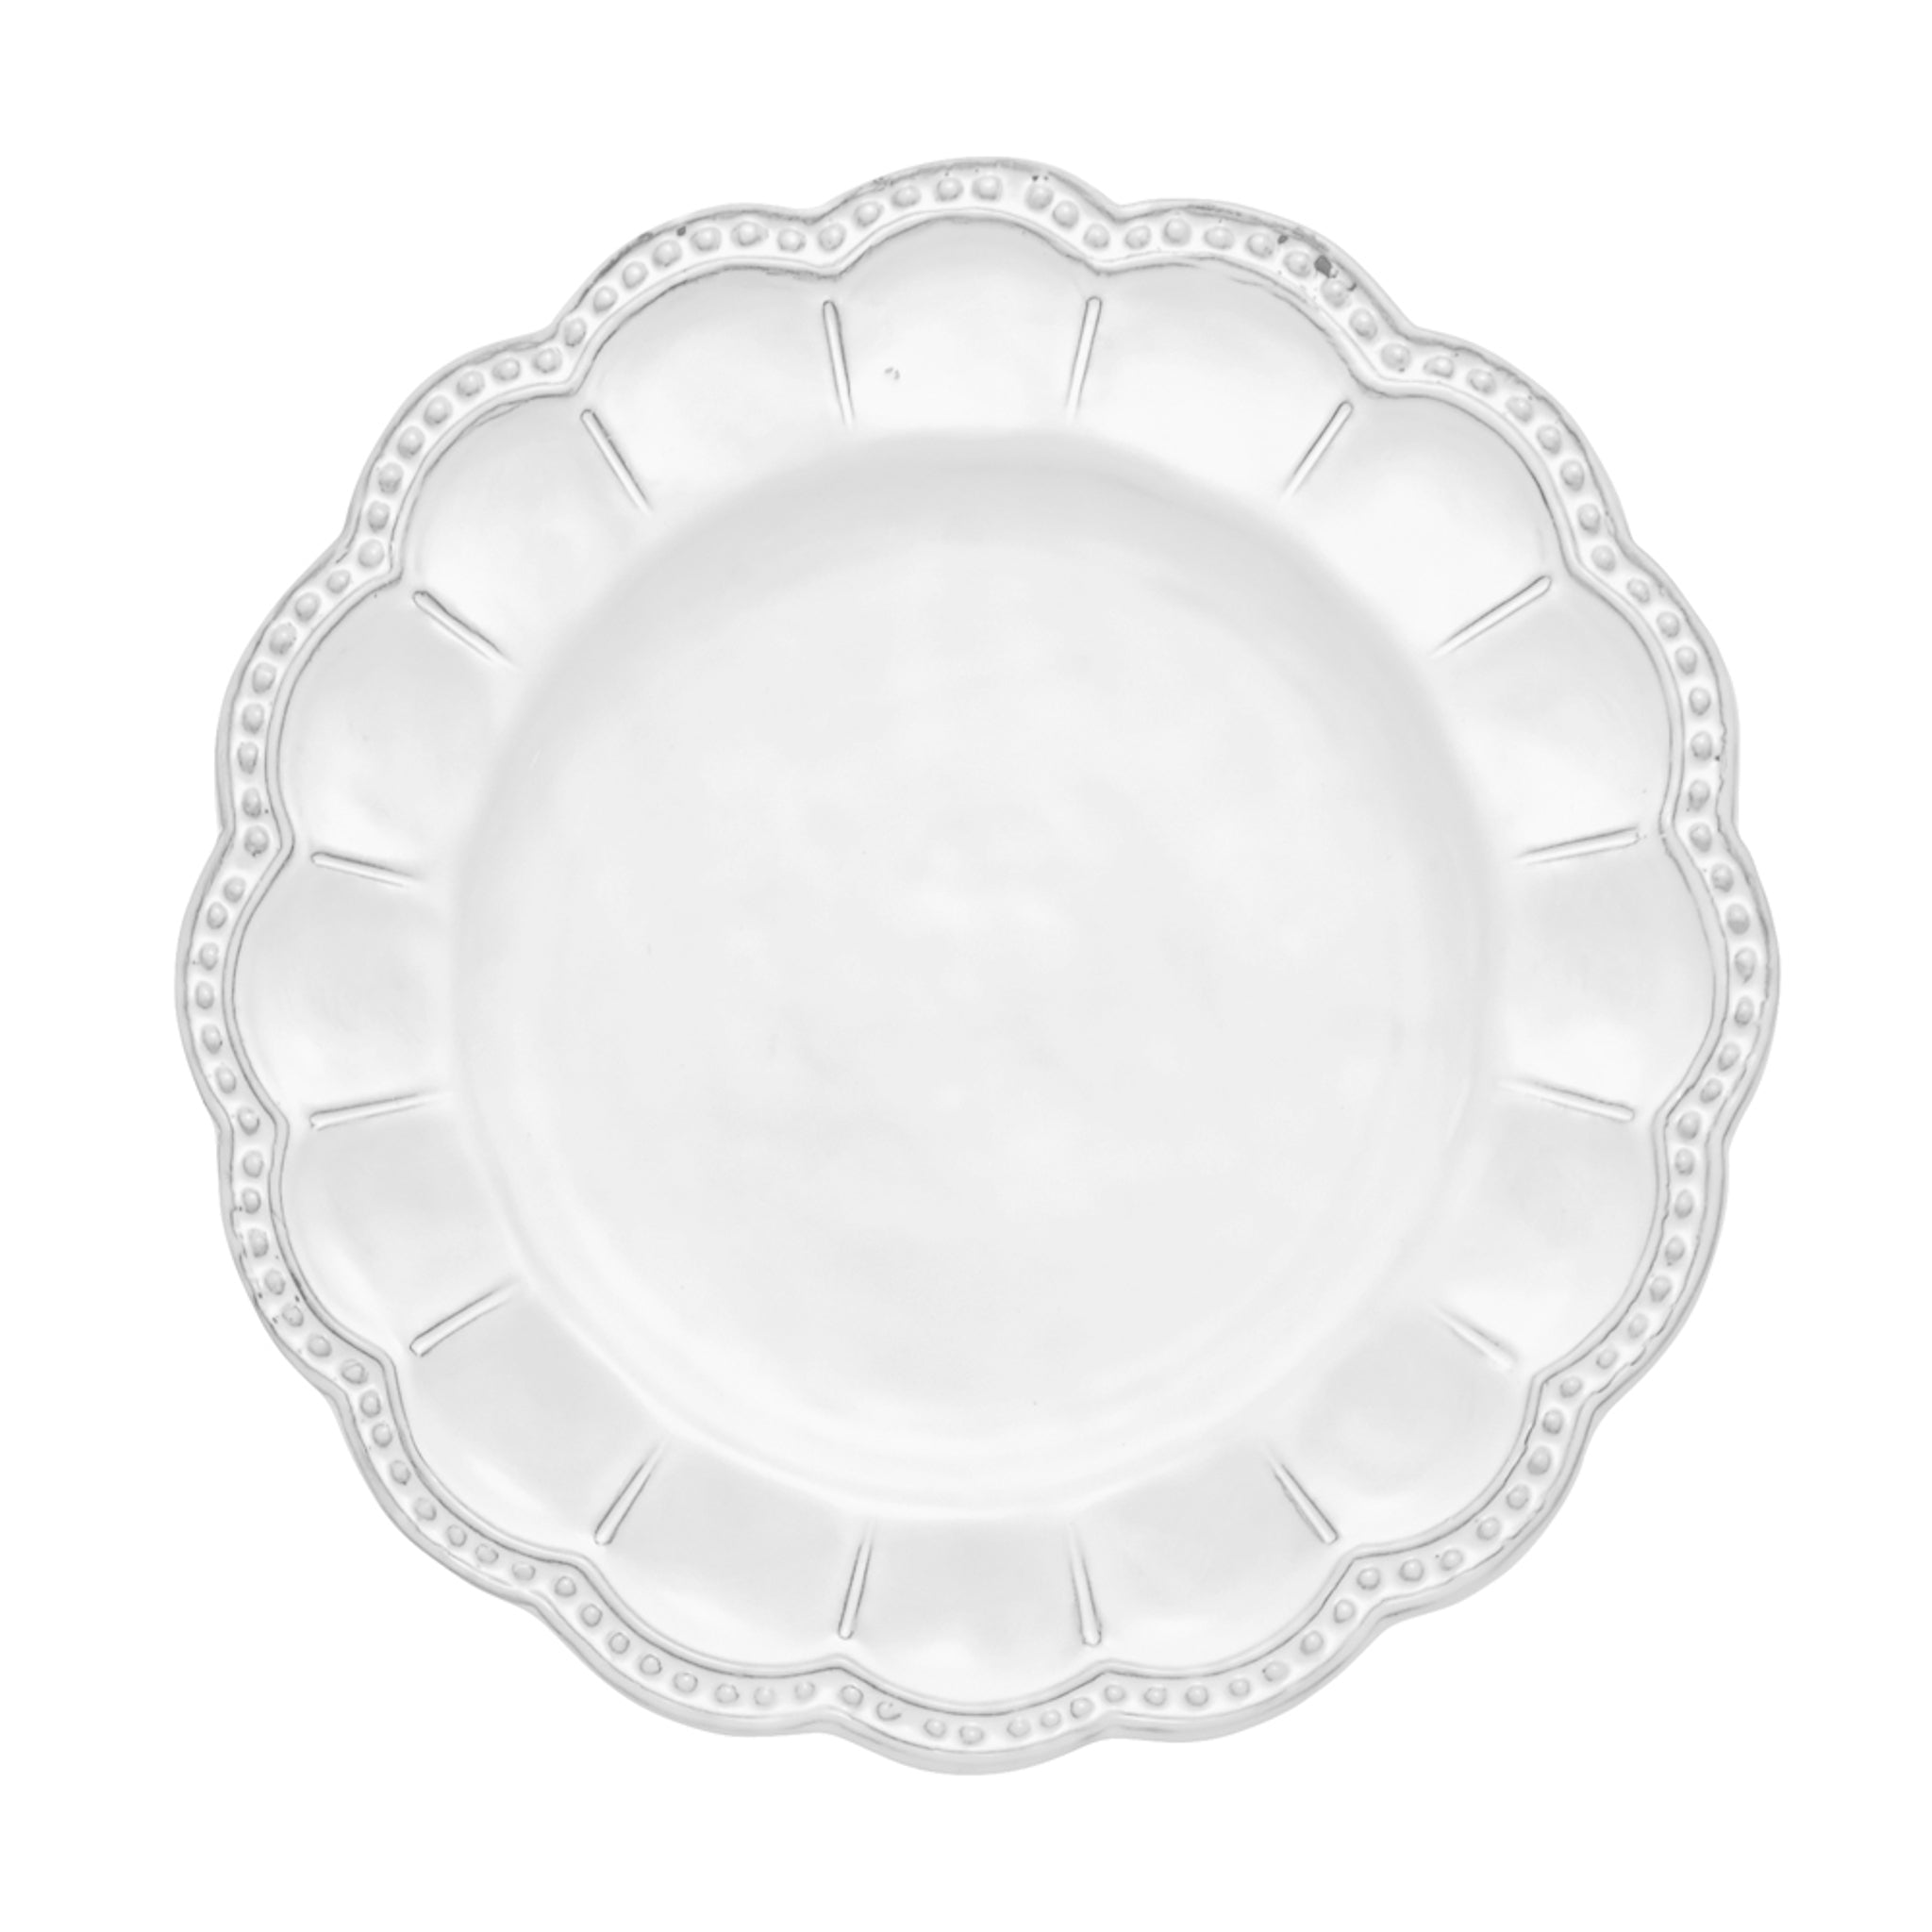 An empty white Arte Italica Bella Bianca Beaded Salad Plate viewed from above.